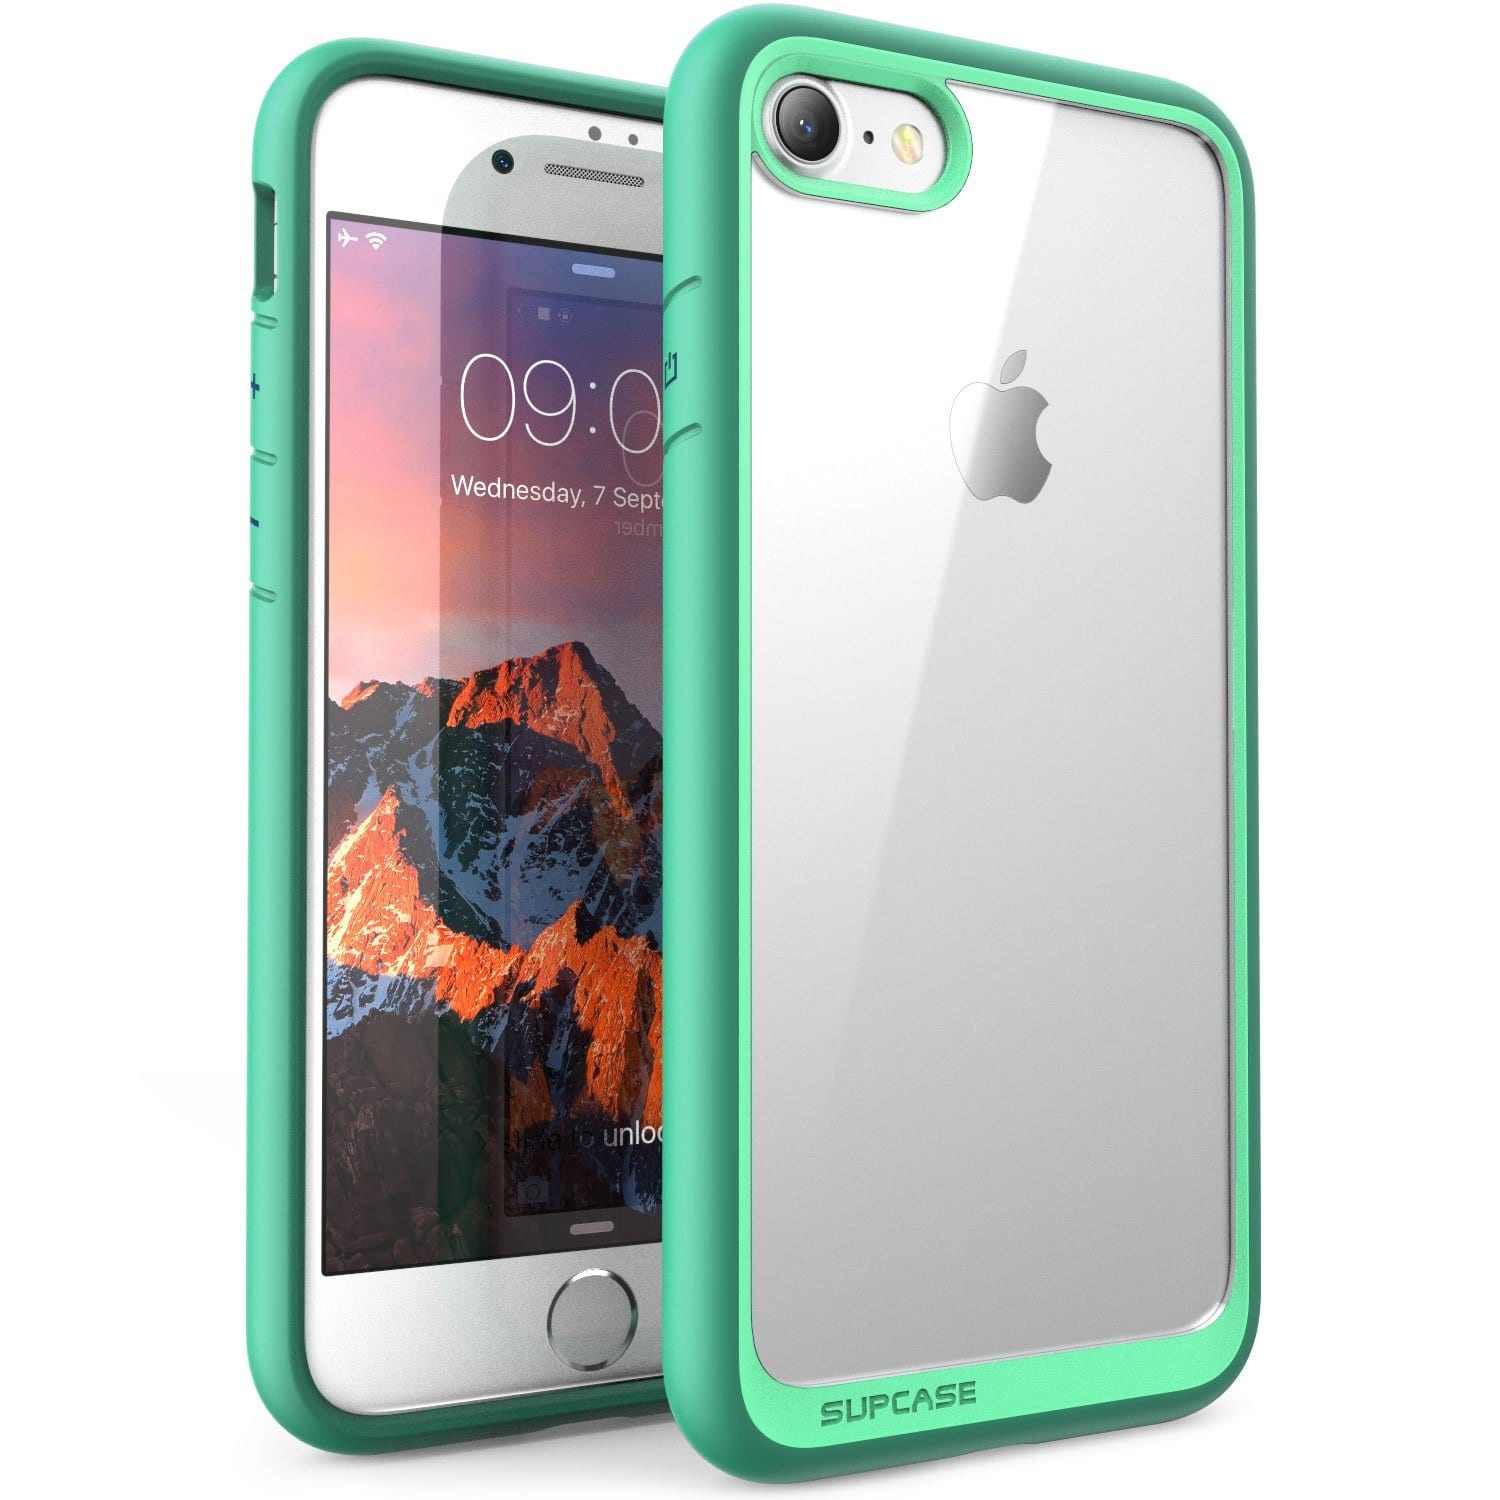 Best iPhone 7 Case: Beetle Green Thin Case